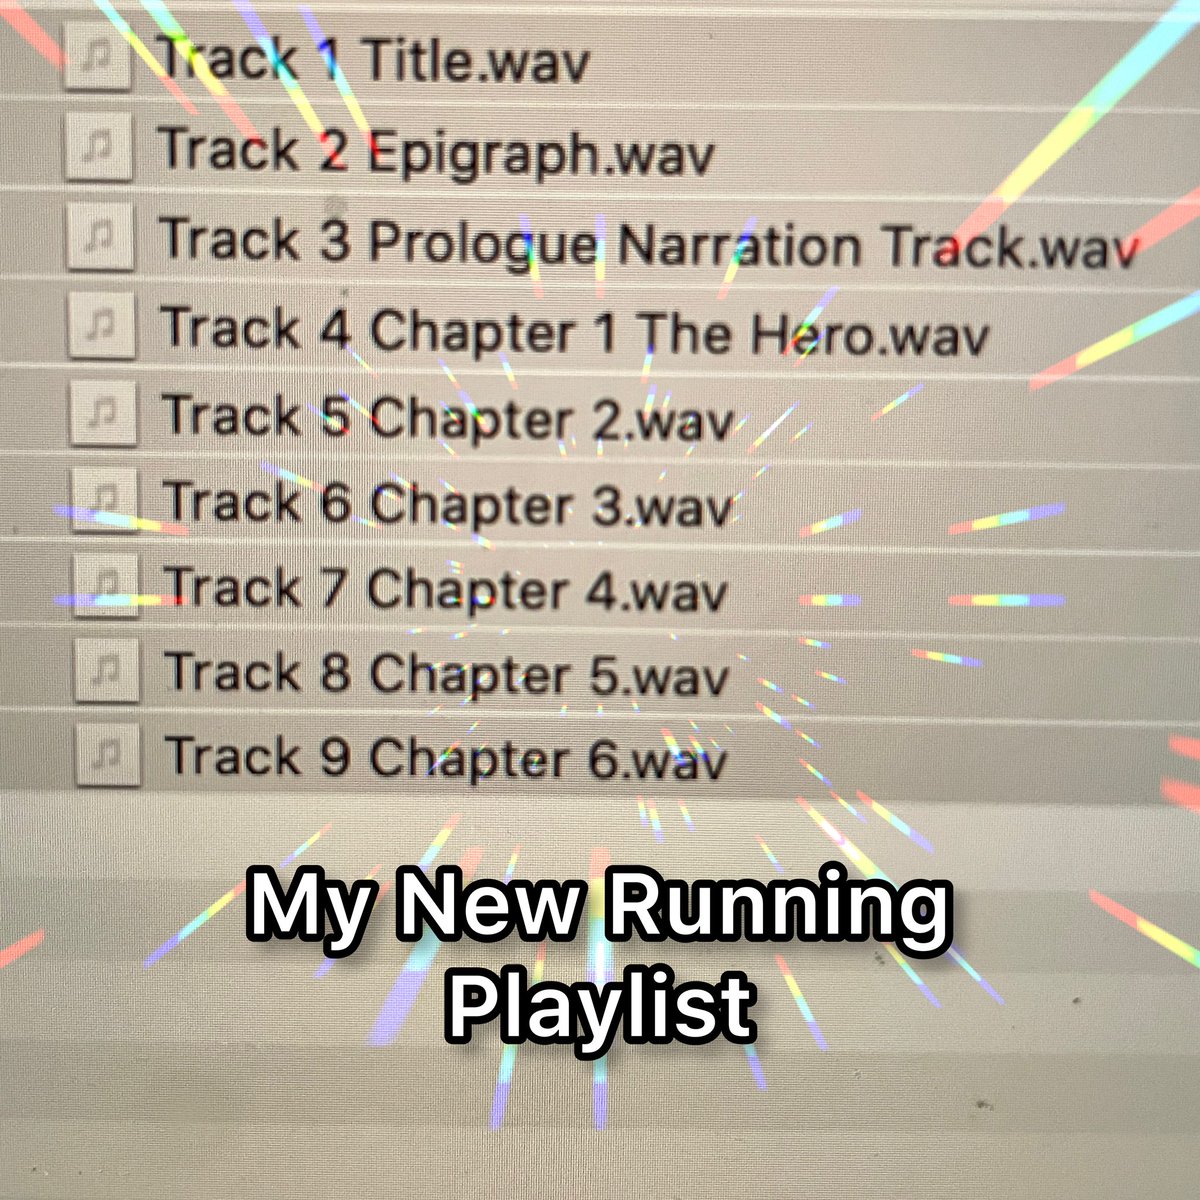 I ran my way through Chapter 1 today, which was nearly 2 miles. 😁 (It would have been over 2 miles a year ago, but hopefully after my surgery and recovery, I’ll get back to my usual stride.) #runningplaylist #audiobook #rawaudio #audiobooknarrator #voiceactor